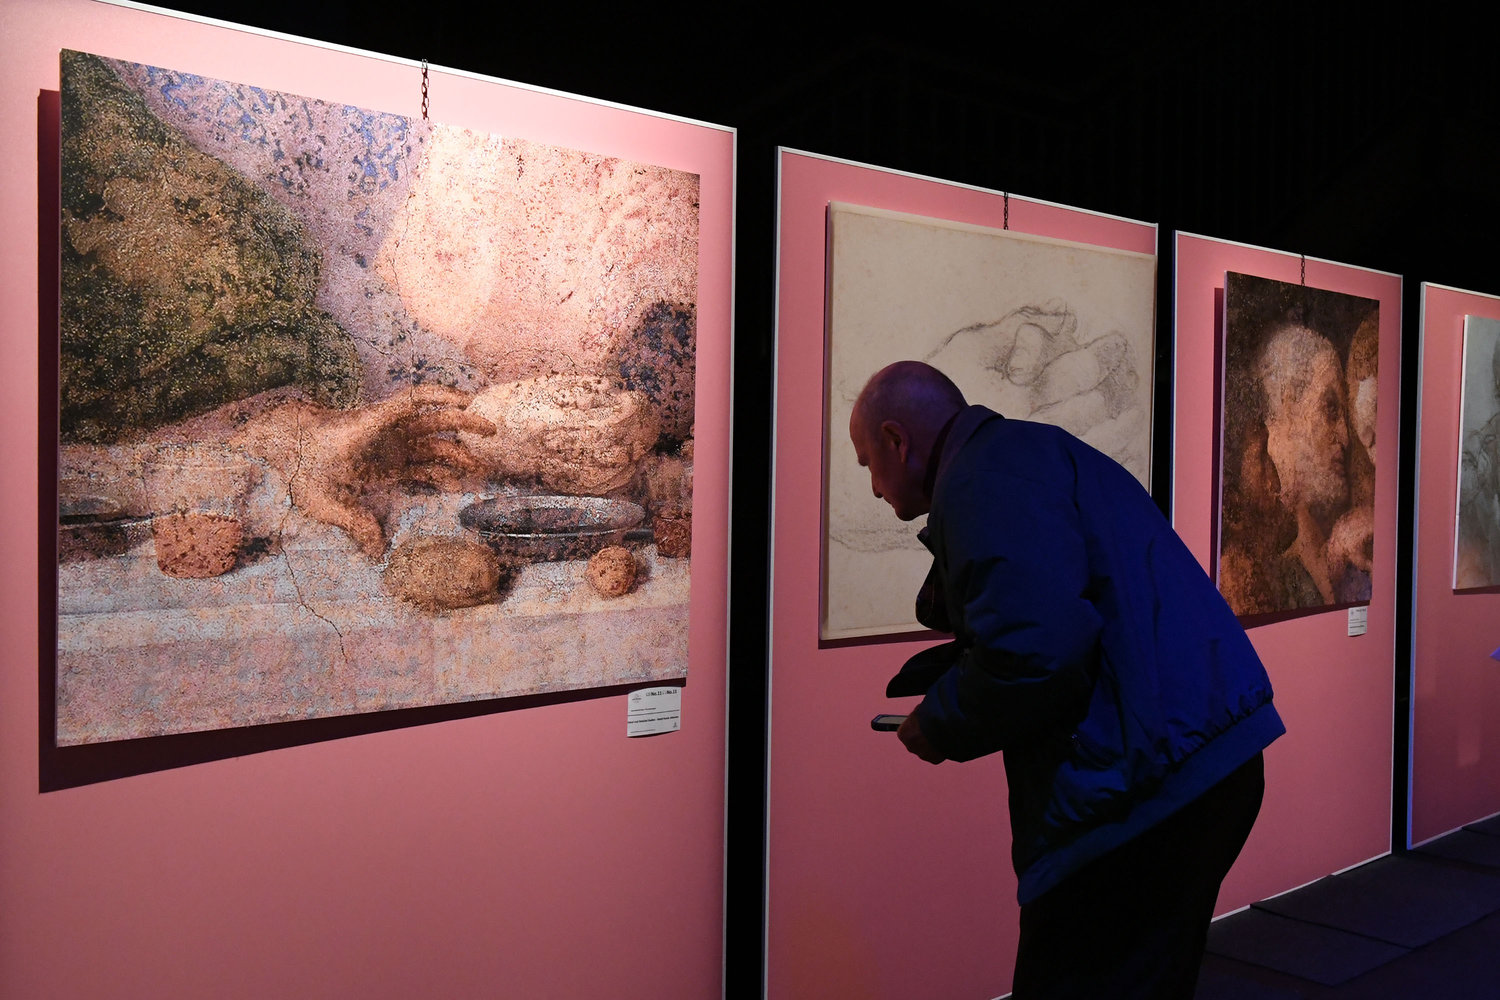 A man closely examines one of the works.